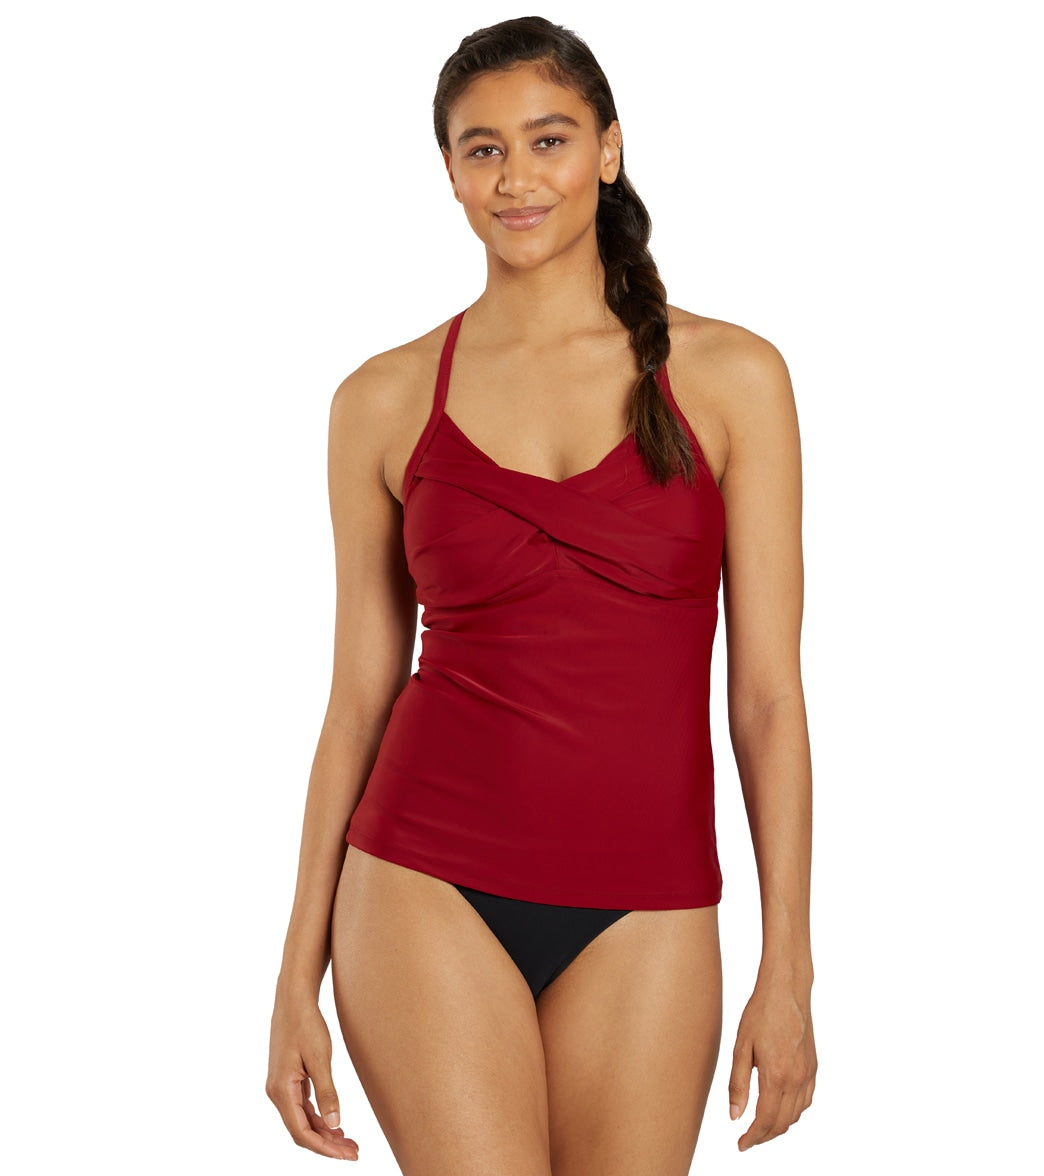 Casual Women's 2 Piece Blouson Tankini Swimsuits Elastic Band-Red Flor –  Yonique